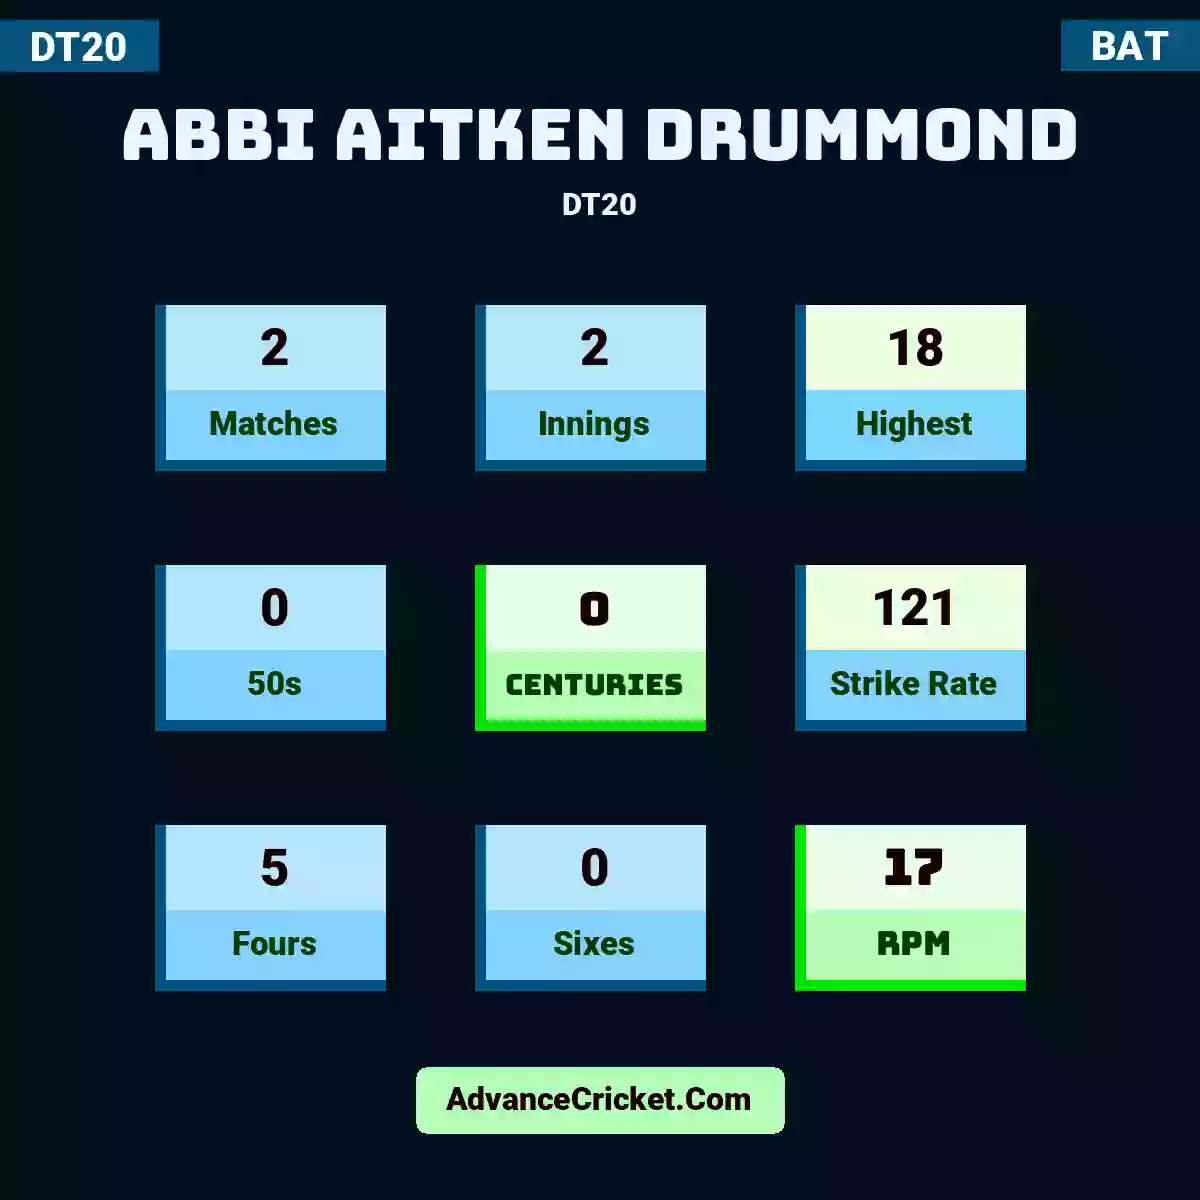 Abbi Aitken Drummond DT20 , Abbi Aitken Drummond played 2 matches, scored 18 runs as highest, 0 half-centuries, and 0 centuries, with a strike rate of 121. A.Drummond hit 5 fours and 0 sixes, with an RPM of 17.